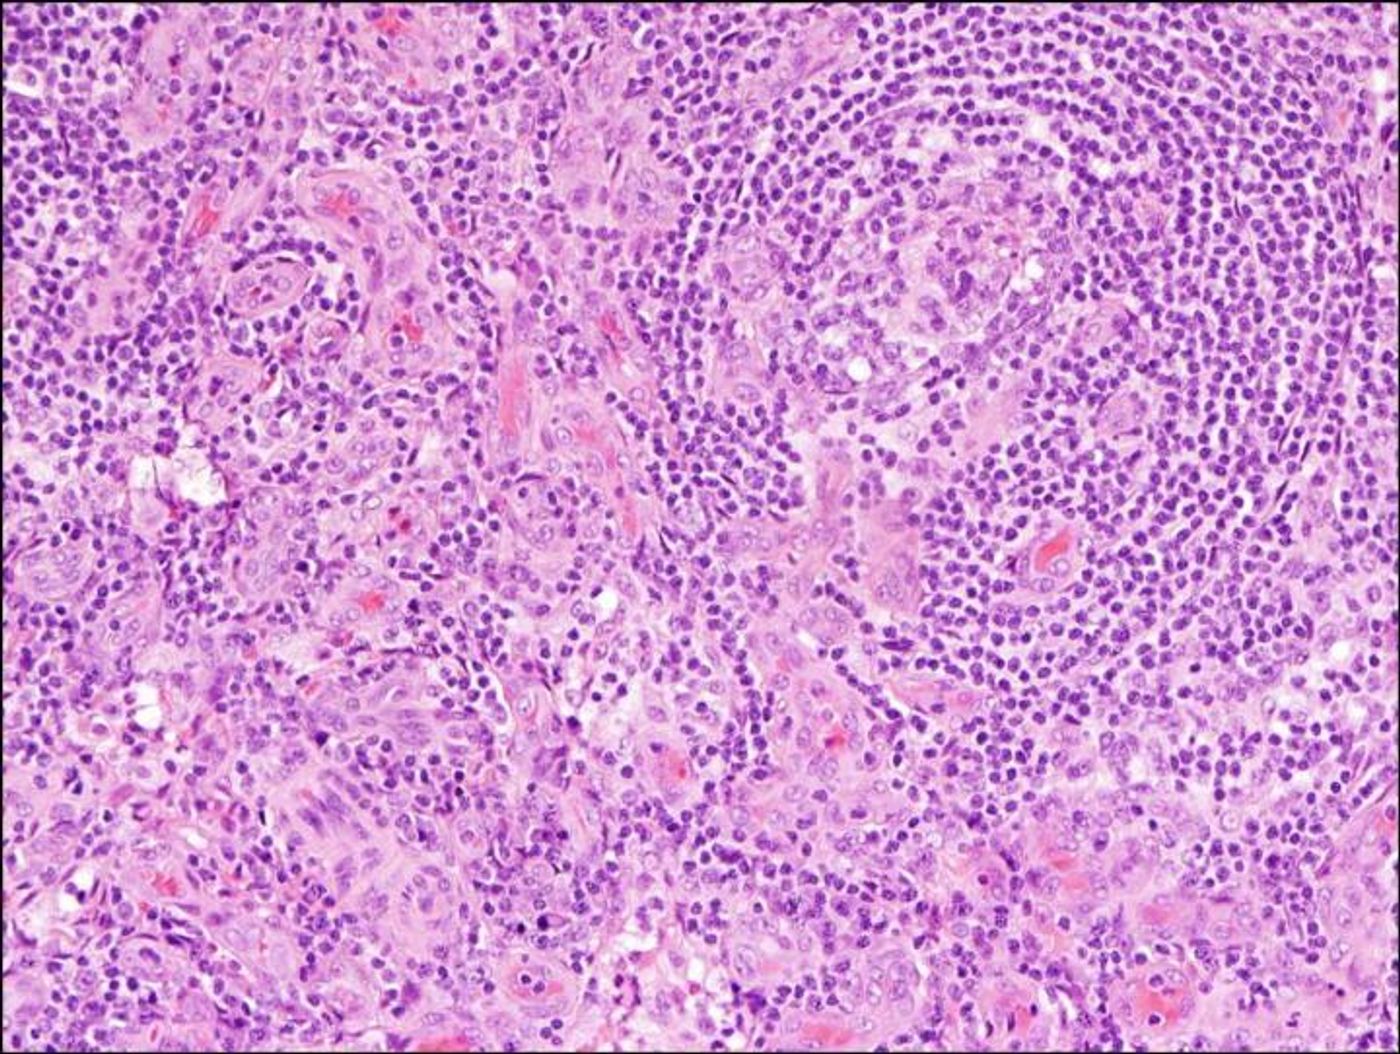 This is an example of lymph node tissue from a person with, idiopathic multicentric Castleman disease. Image shows Increased number of blood vessels and smaller germinal centers where immune cells mature in the lymph node, which are two of the pathology features needed to make the diagnosis. Source: David Fajgenbaum, MD, Perelman School of Medicine, University of Pennsylvania